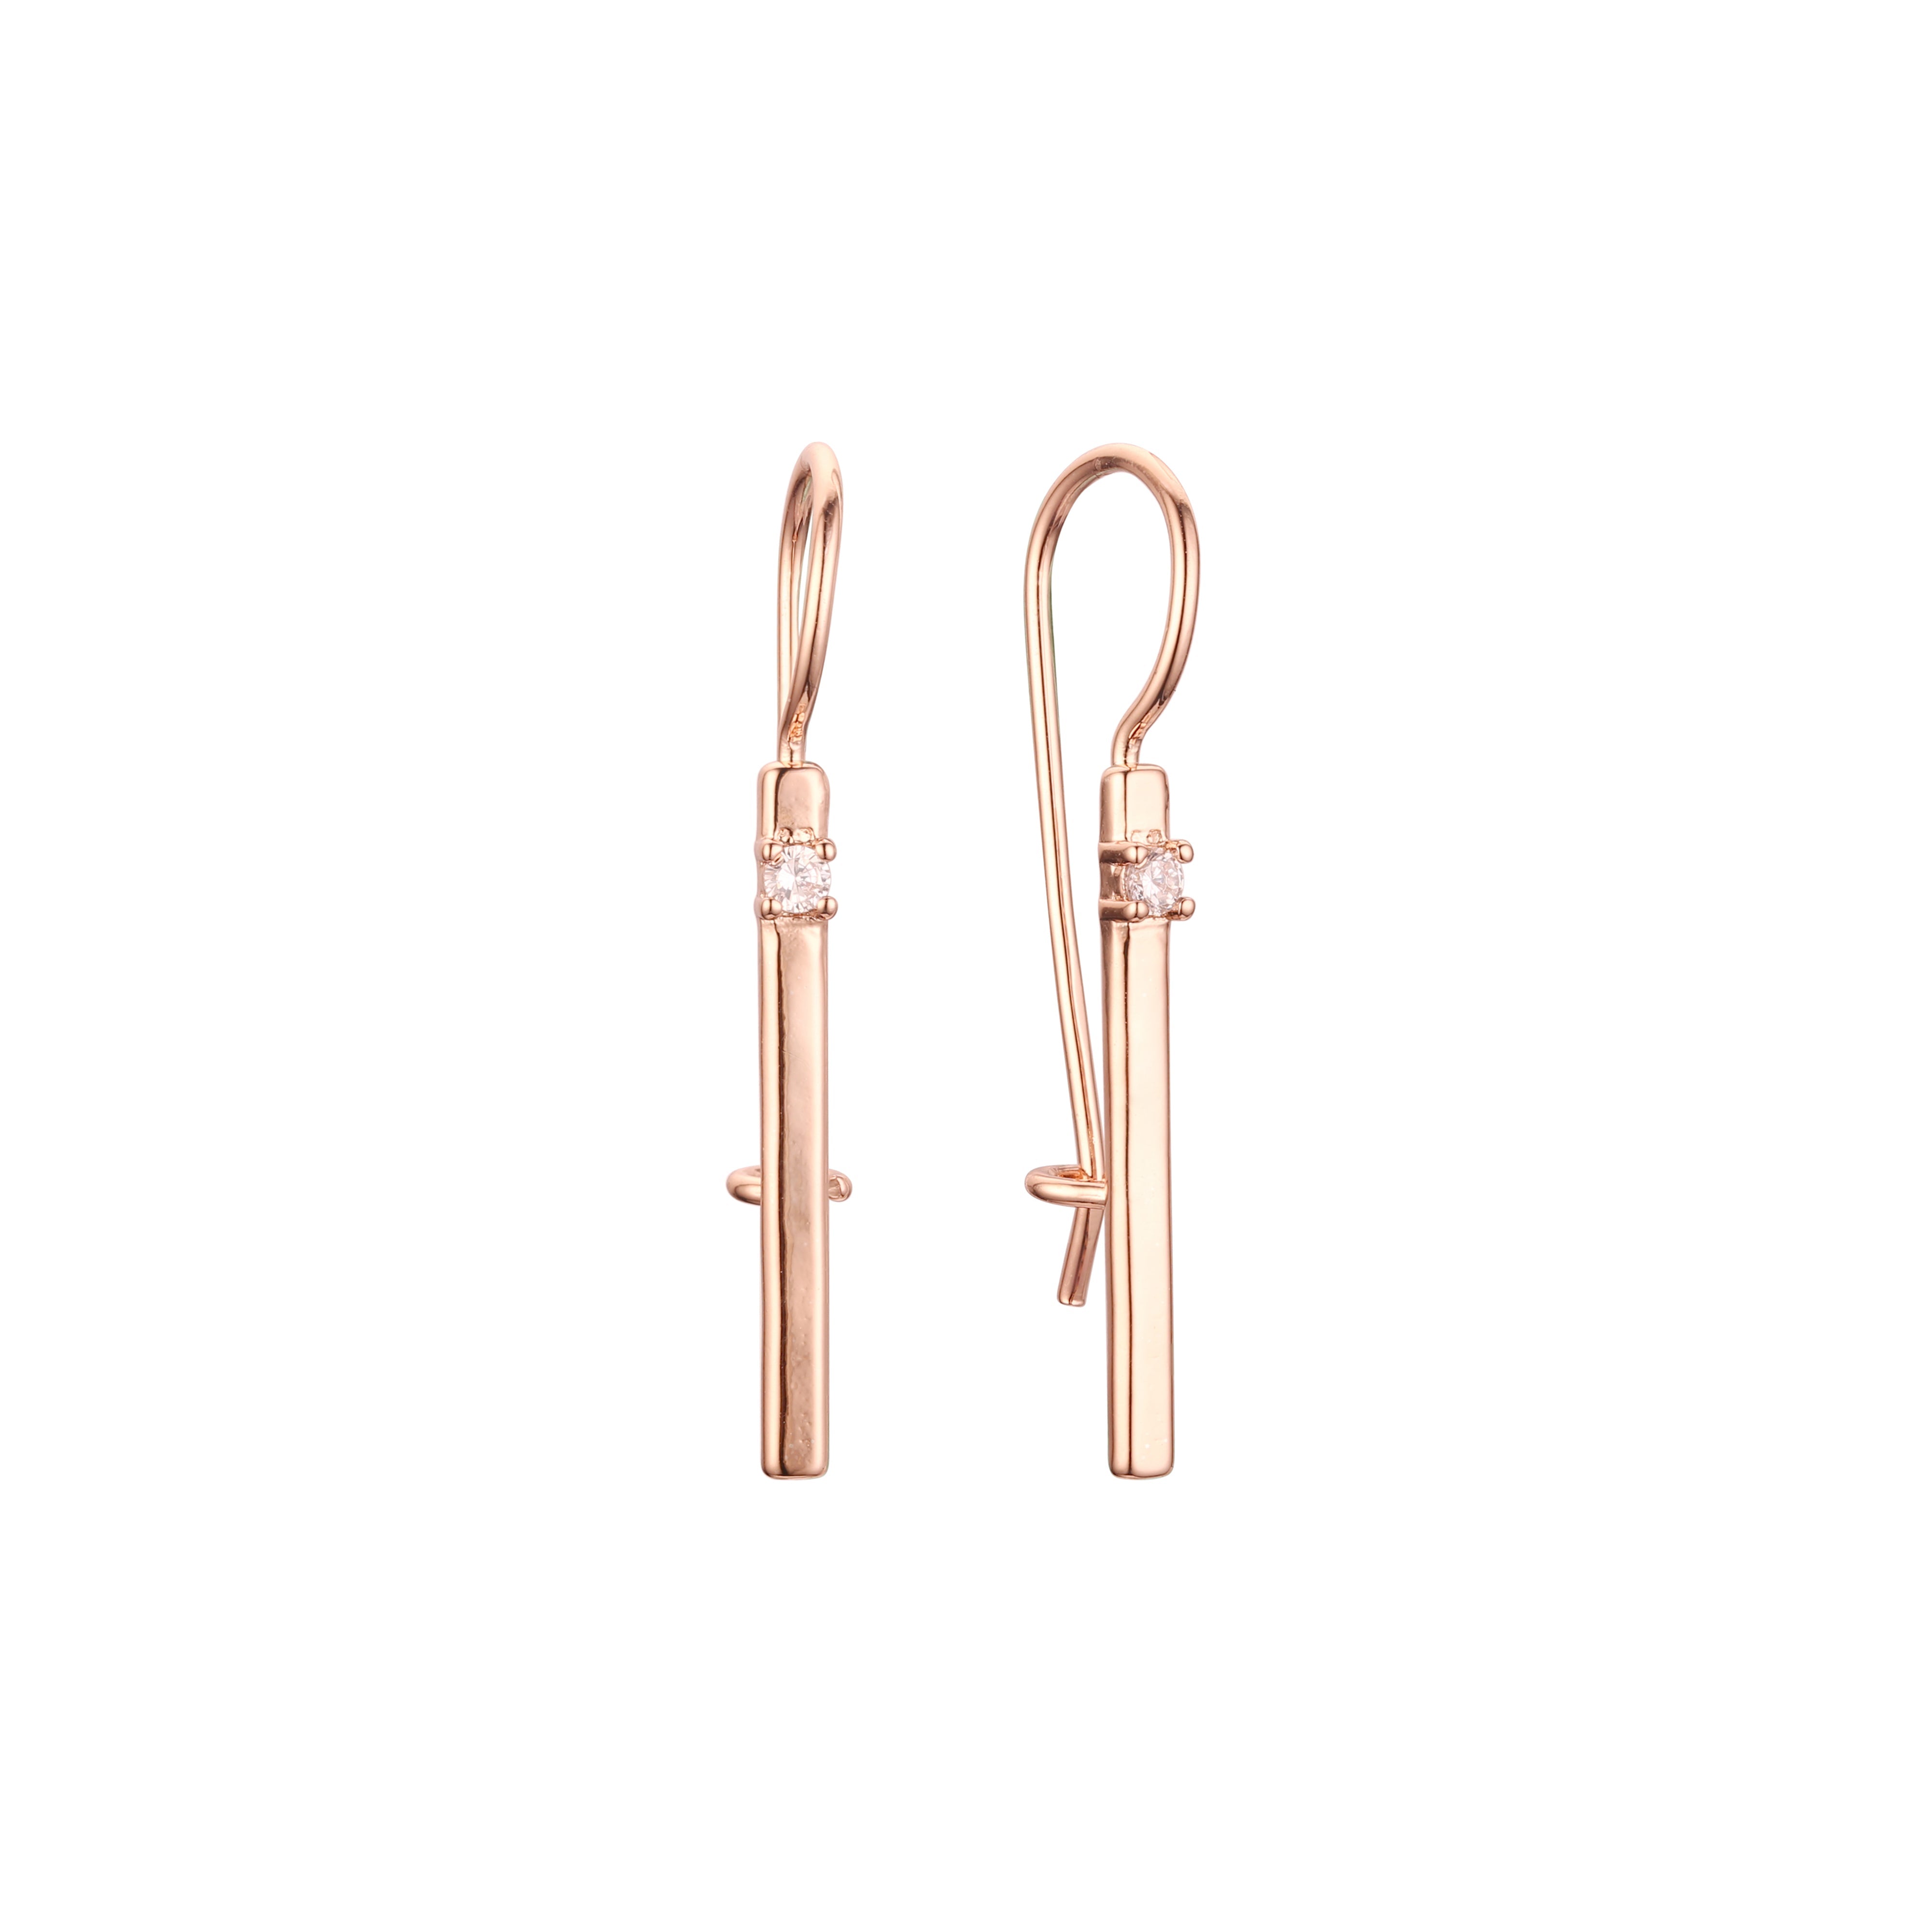 Wire hook earrings in Rose Gold, two tone plating colors